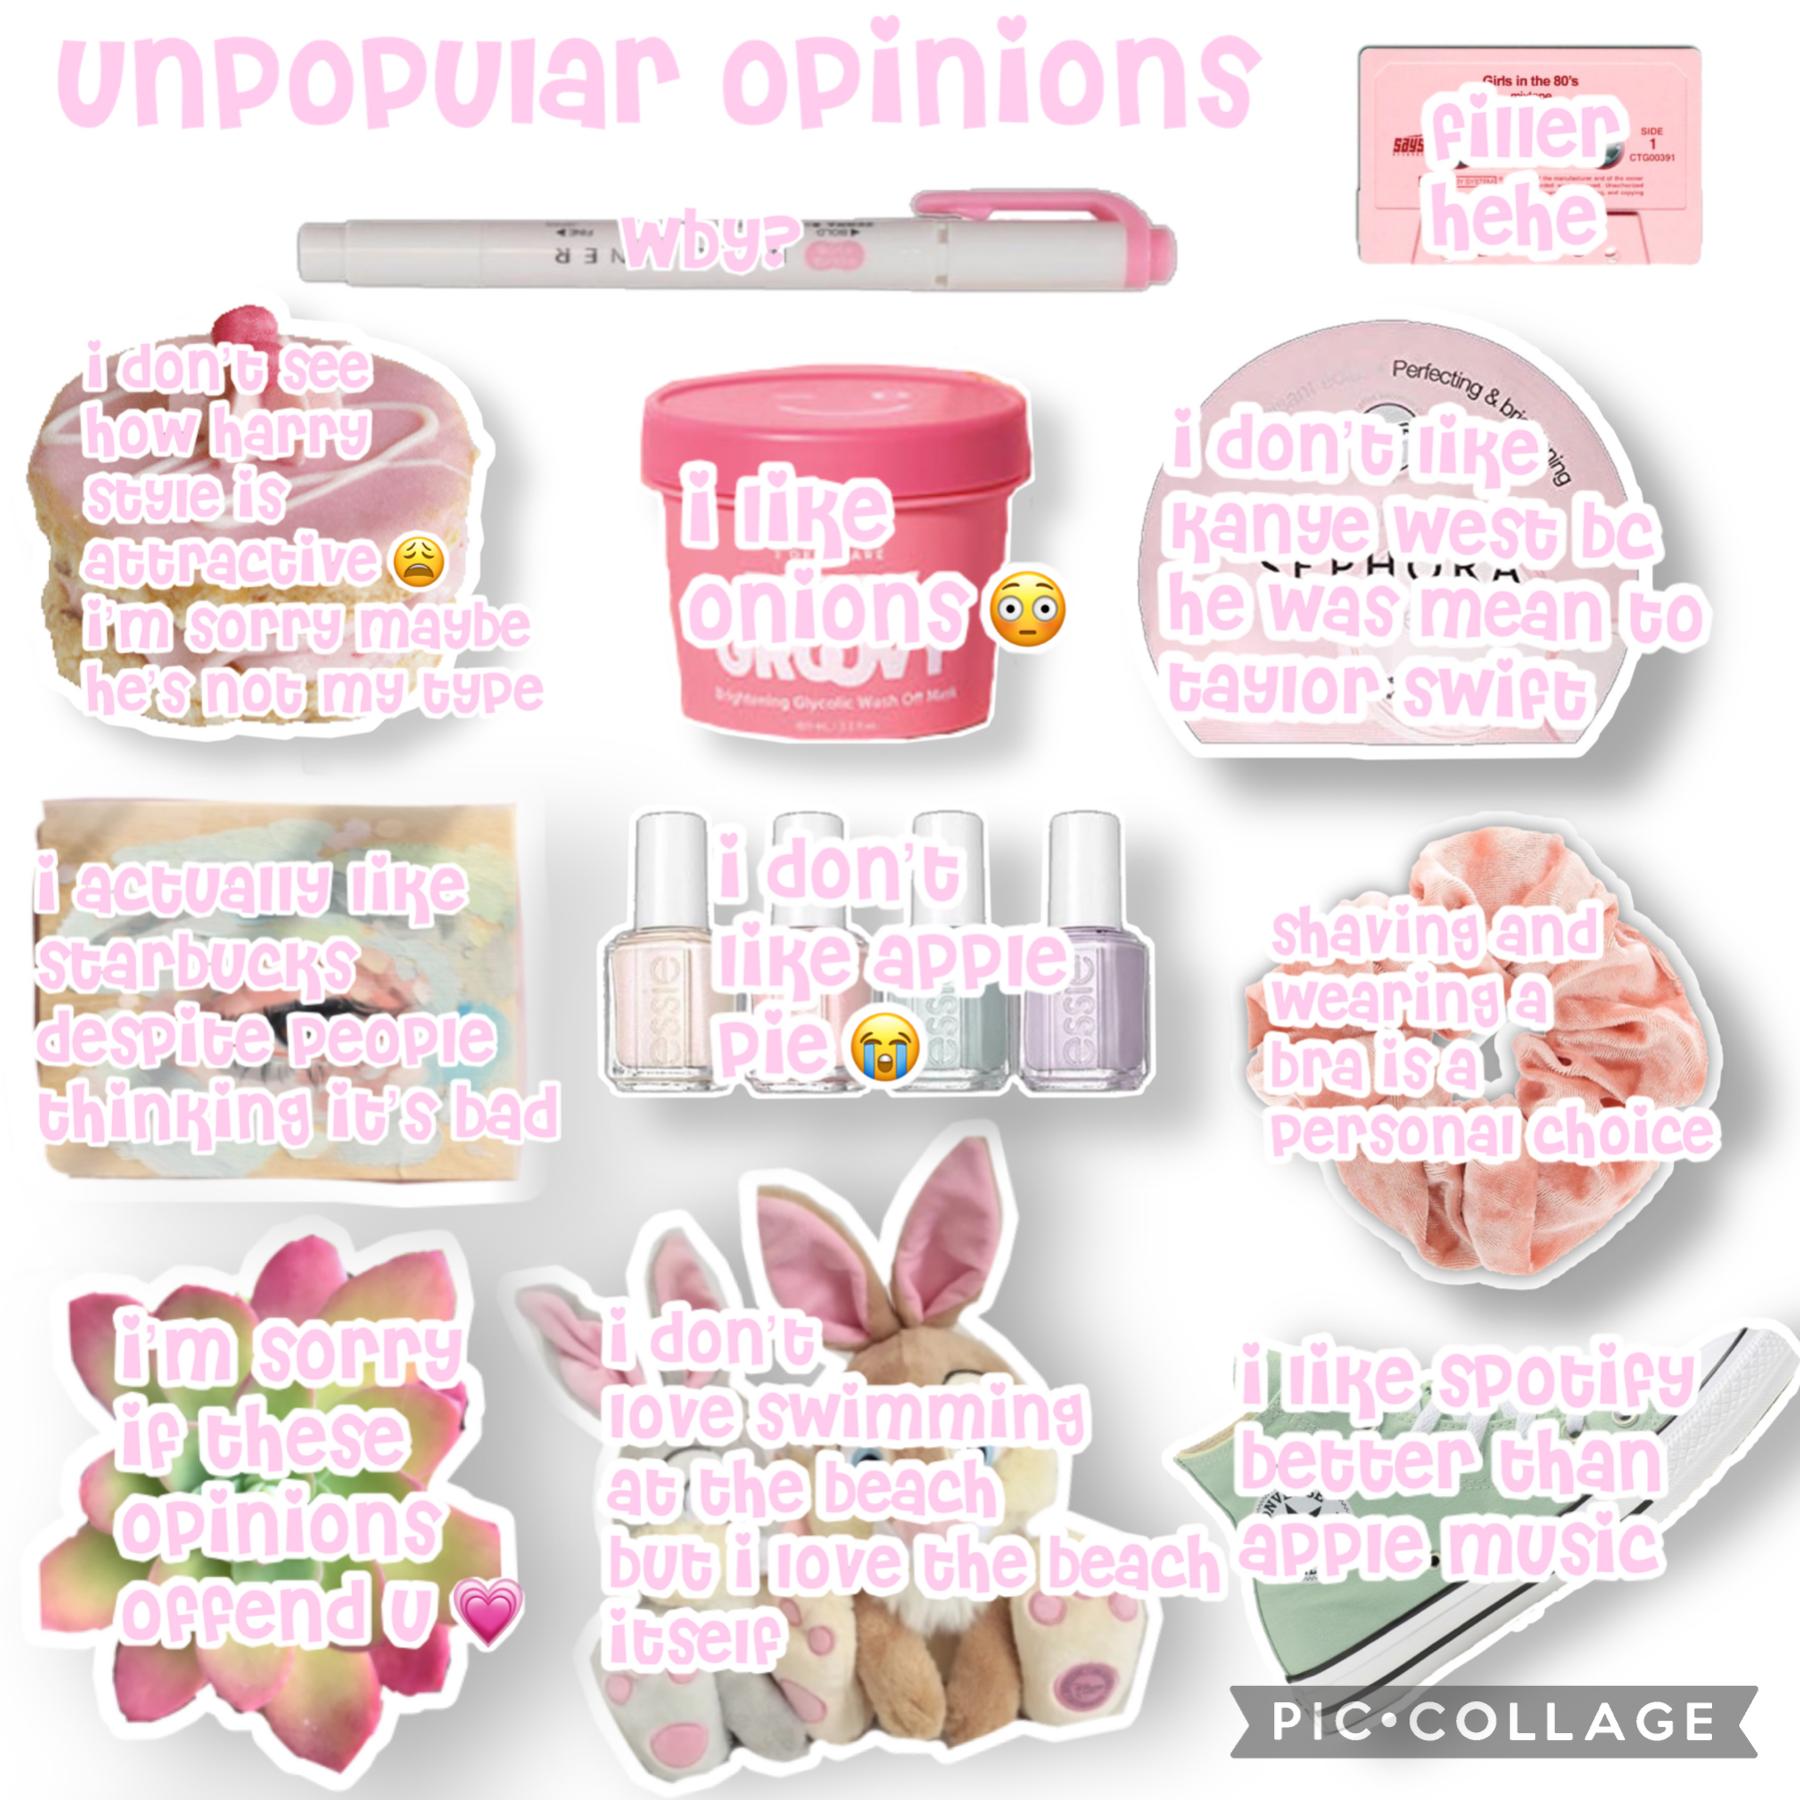 any unpopular opinions yall? 💗